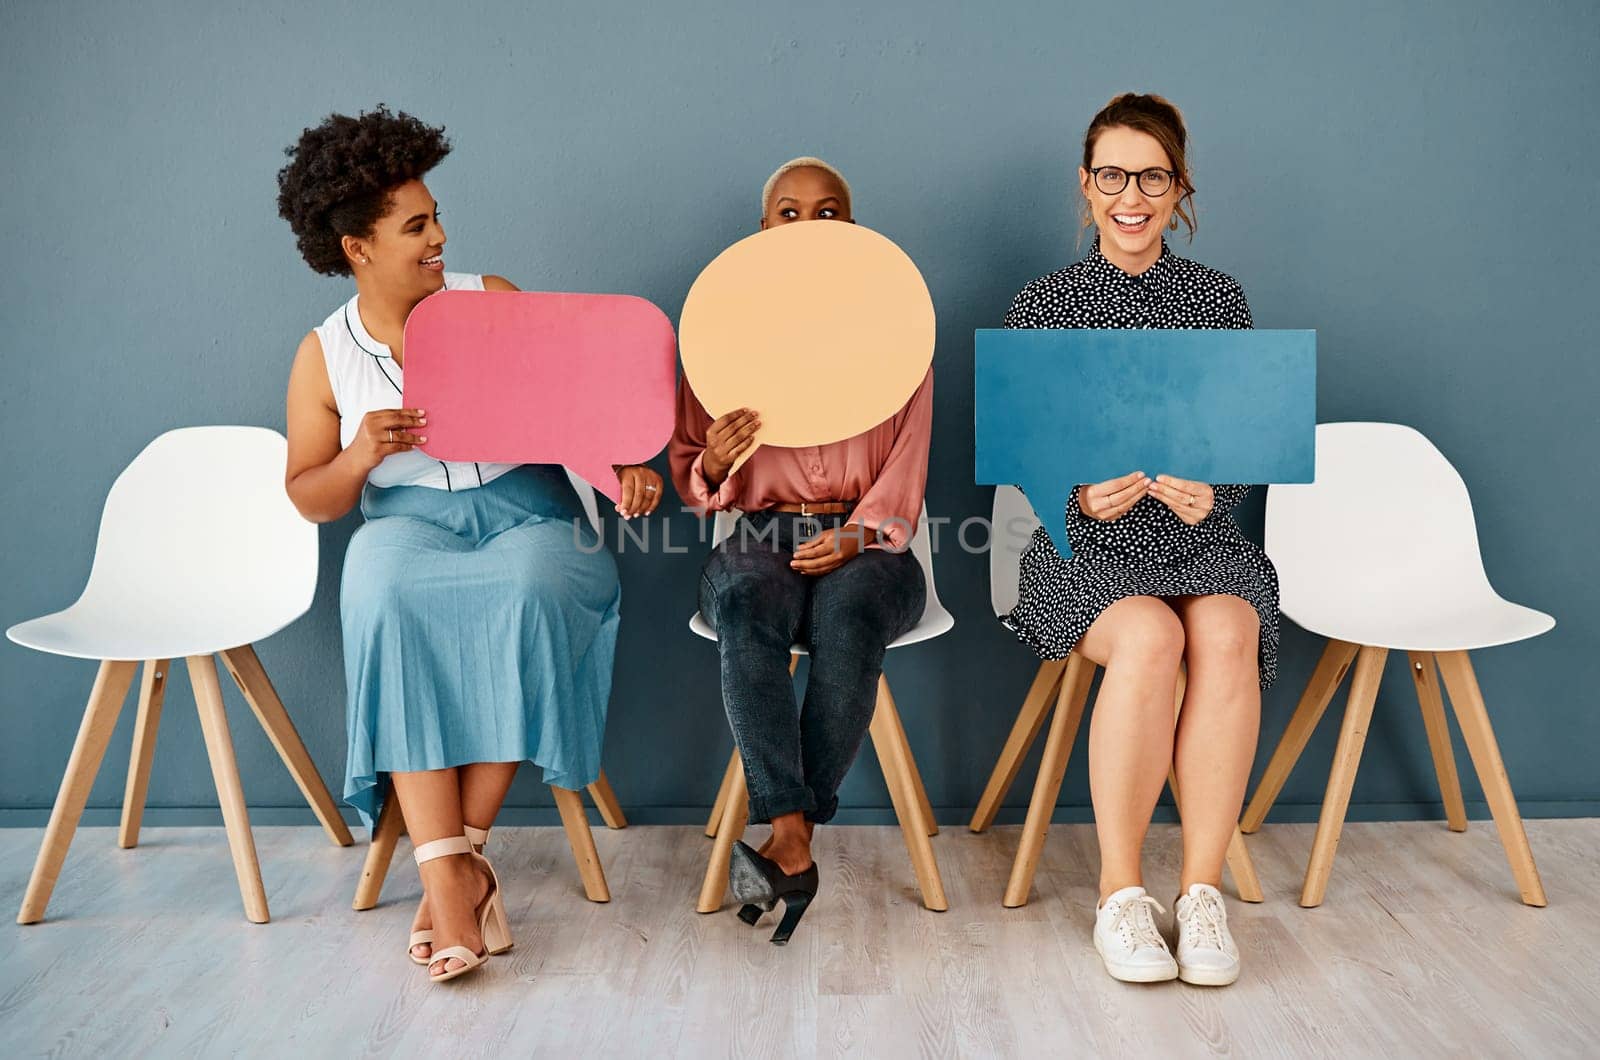 Okay guys forget I said that. Studio shot of a group of attractive young businesswomen holding speech bubbles while sitting in a row against a grey background